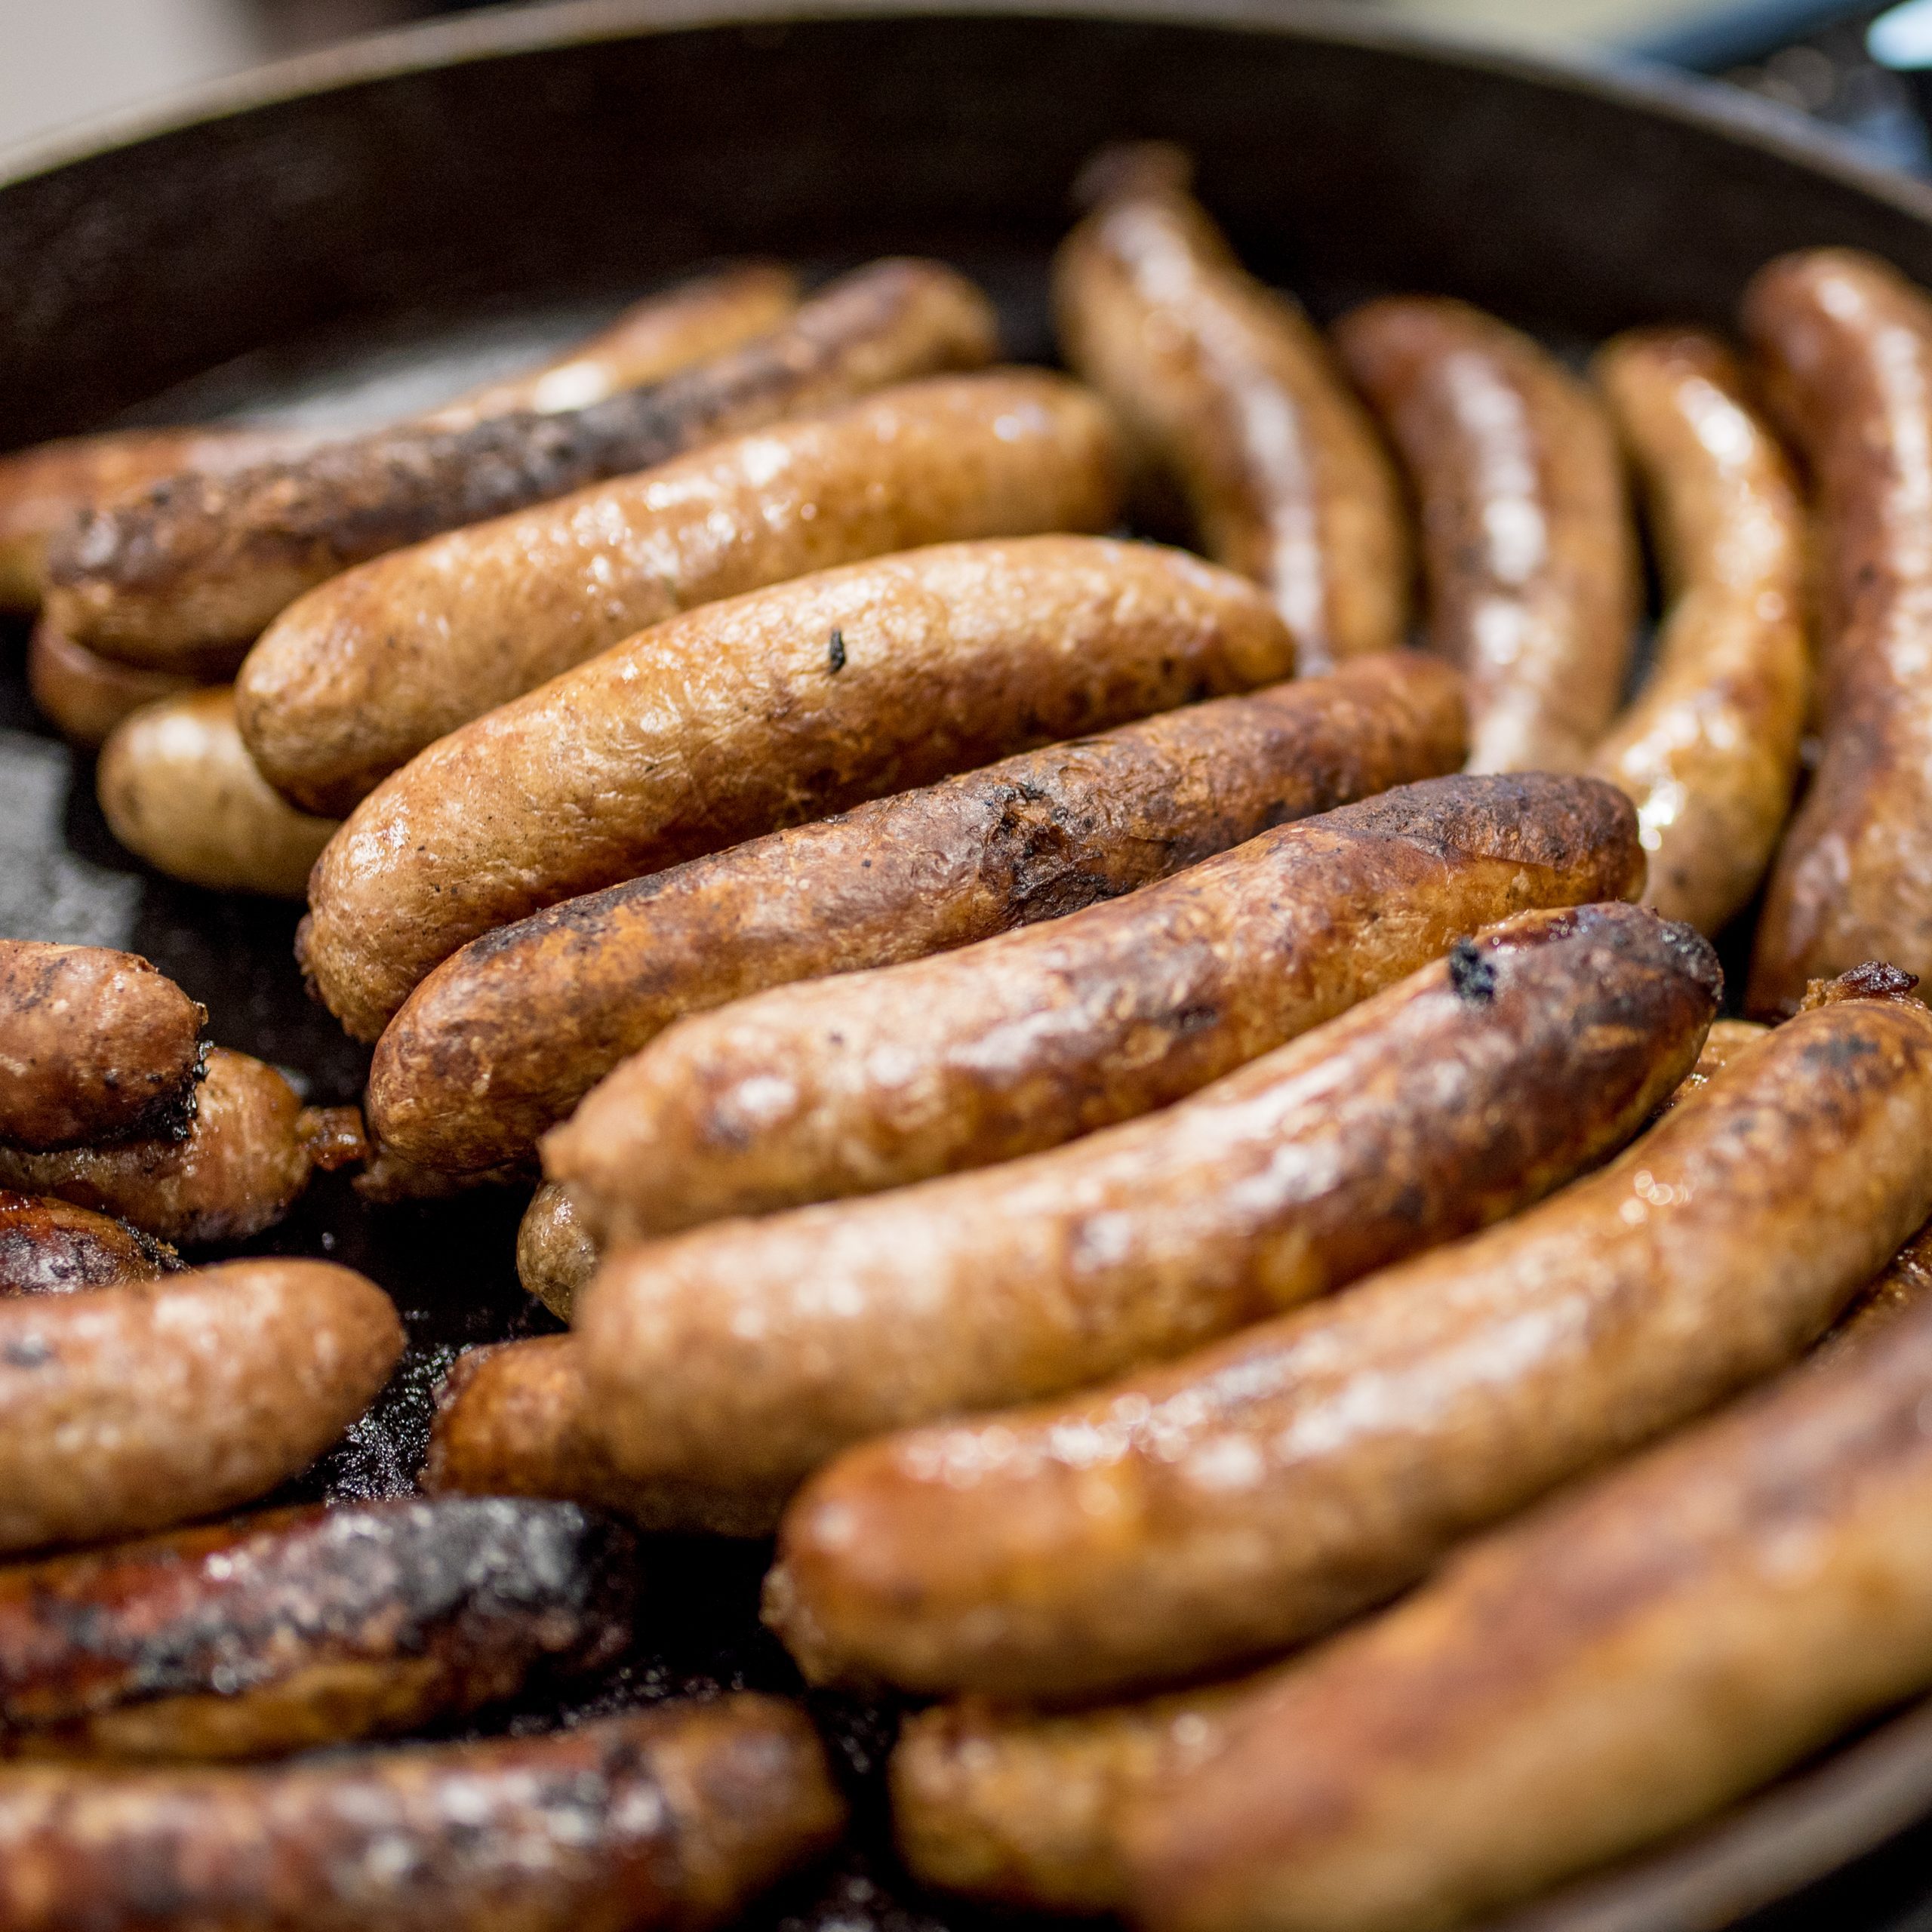 Sausages in a pan